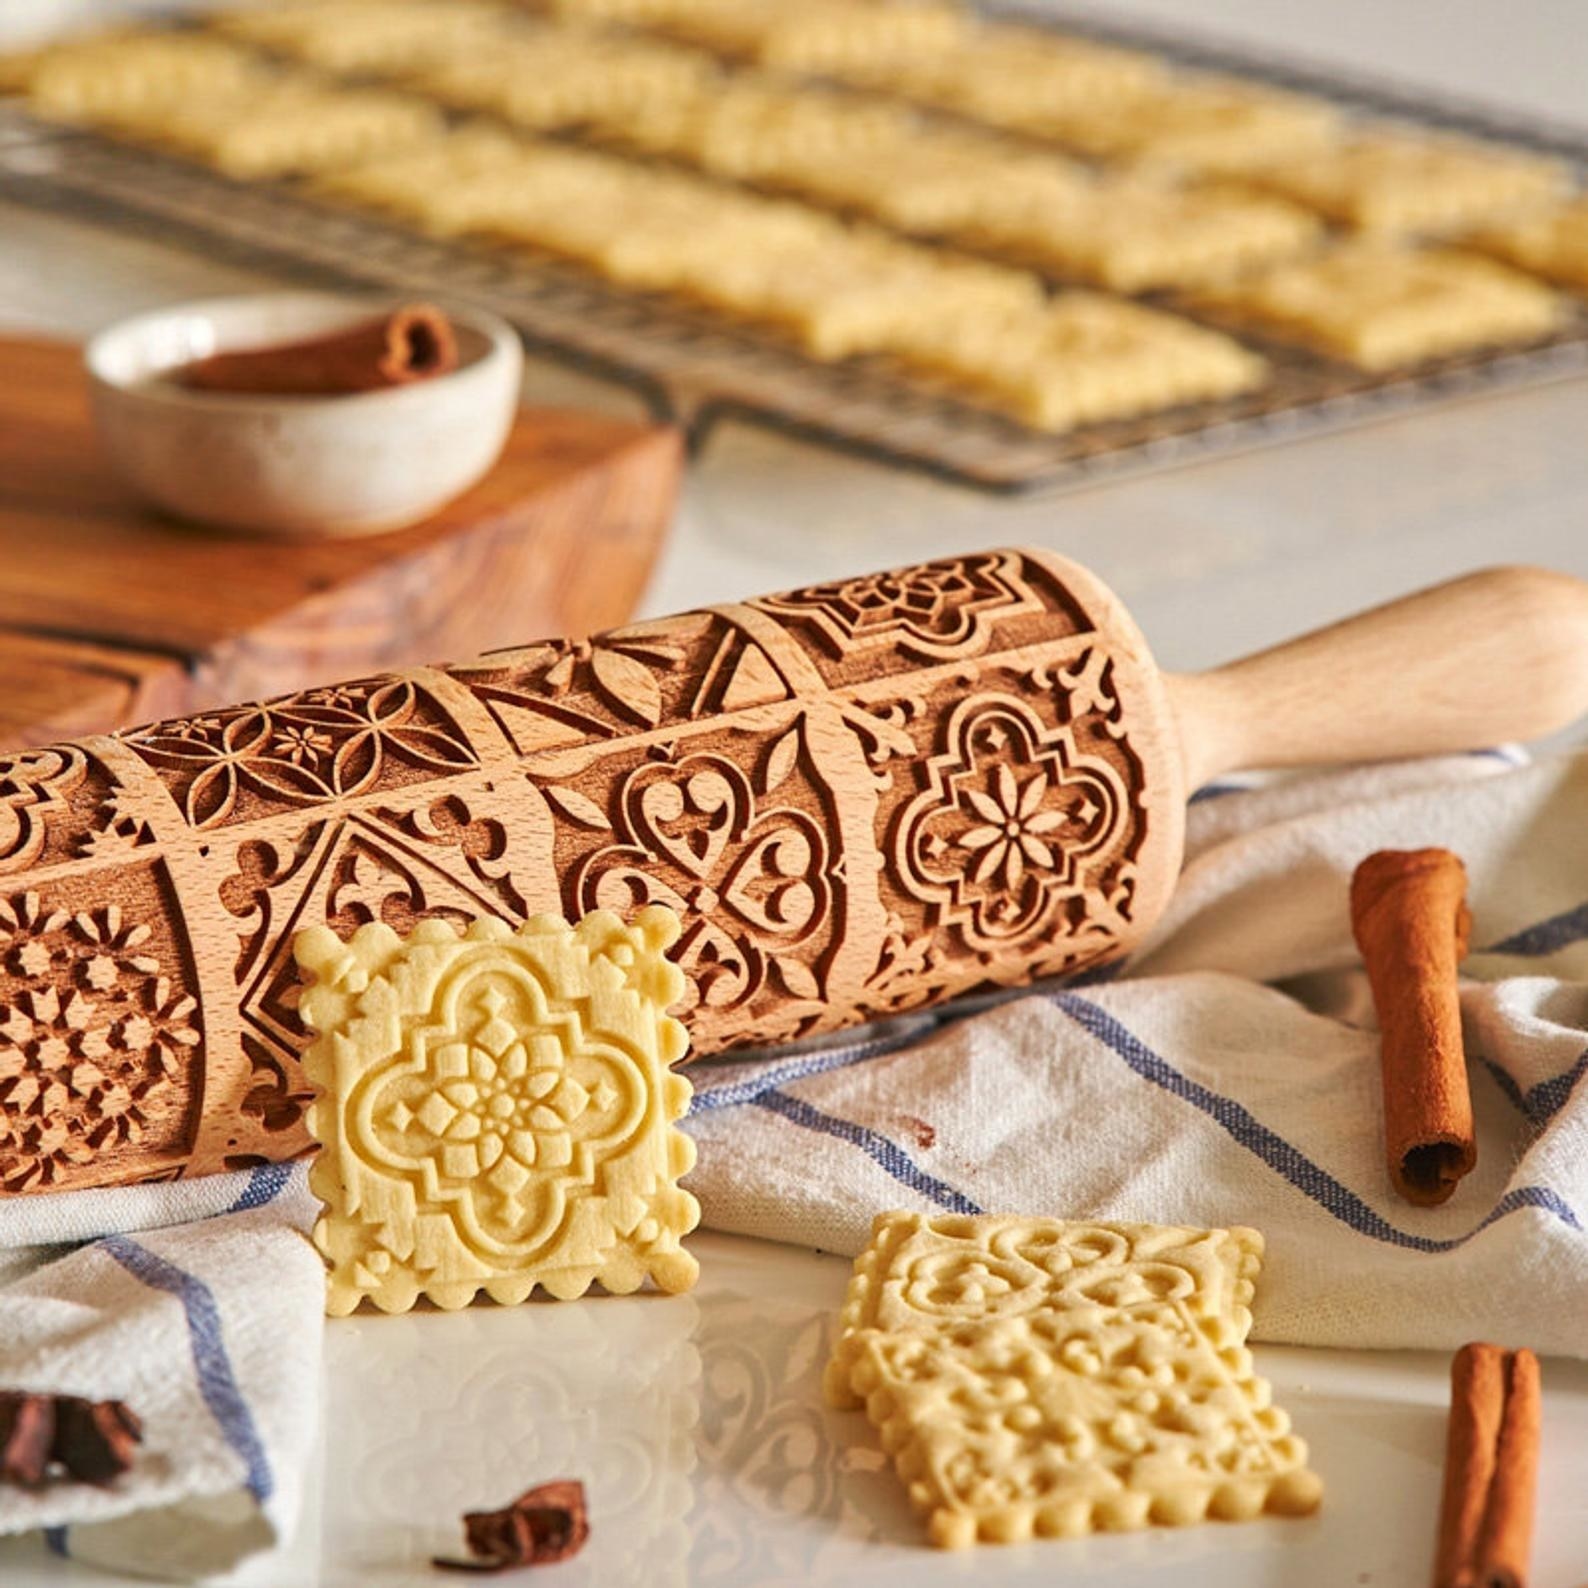 the vintage embossing rolling pin next to cuts of dough with floral embossed designs